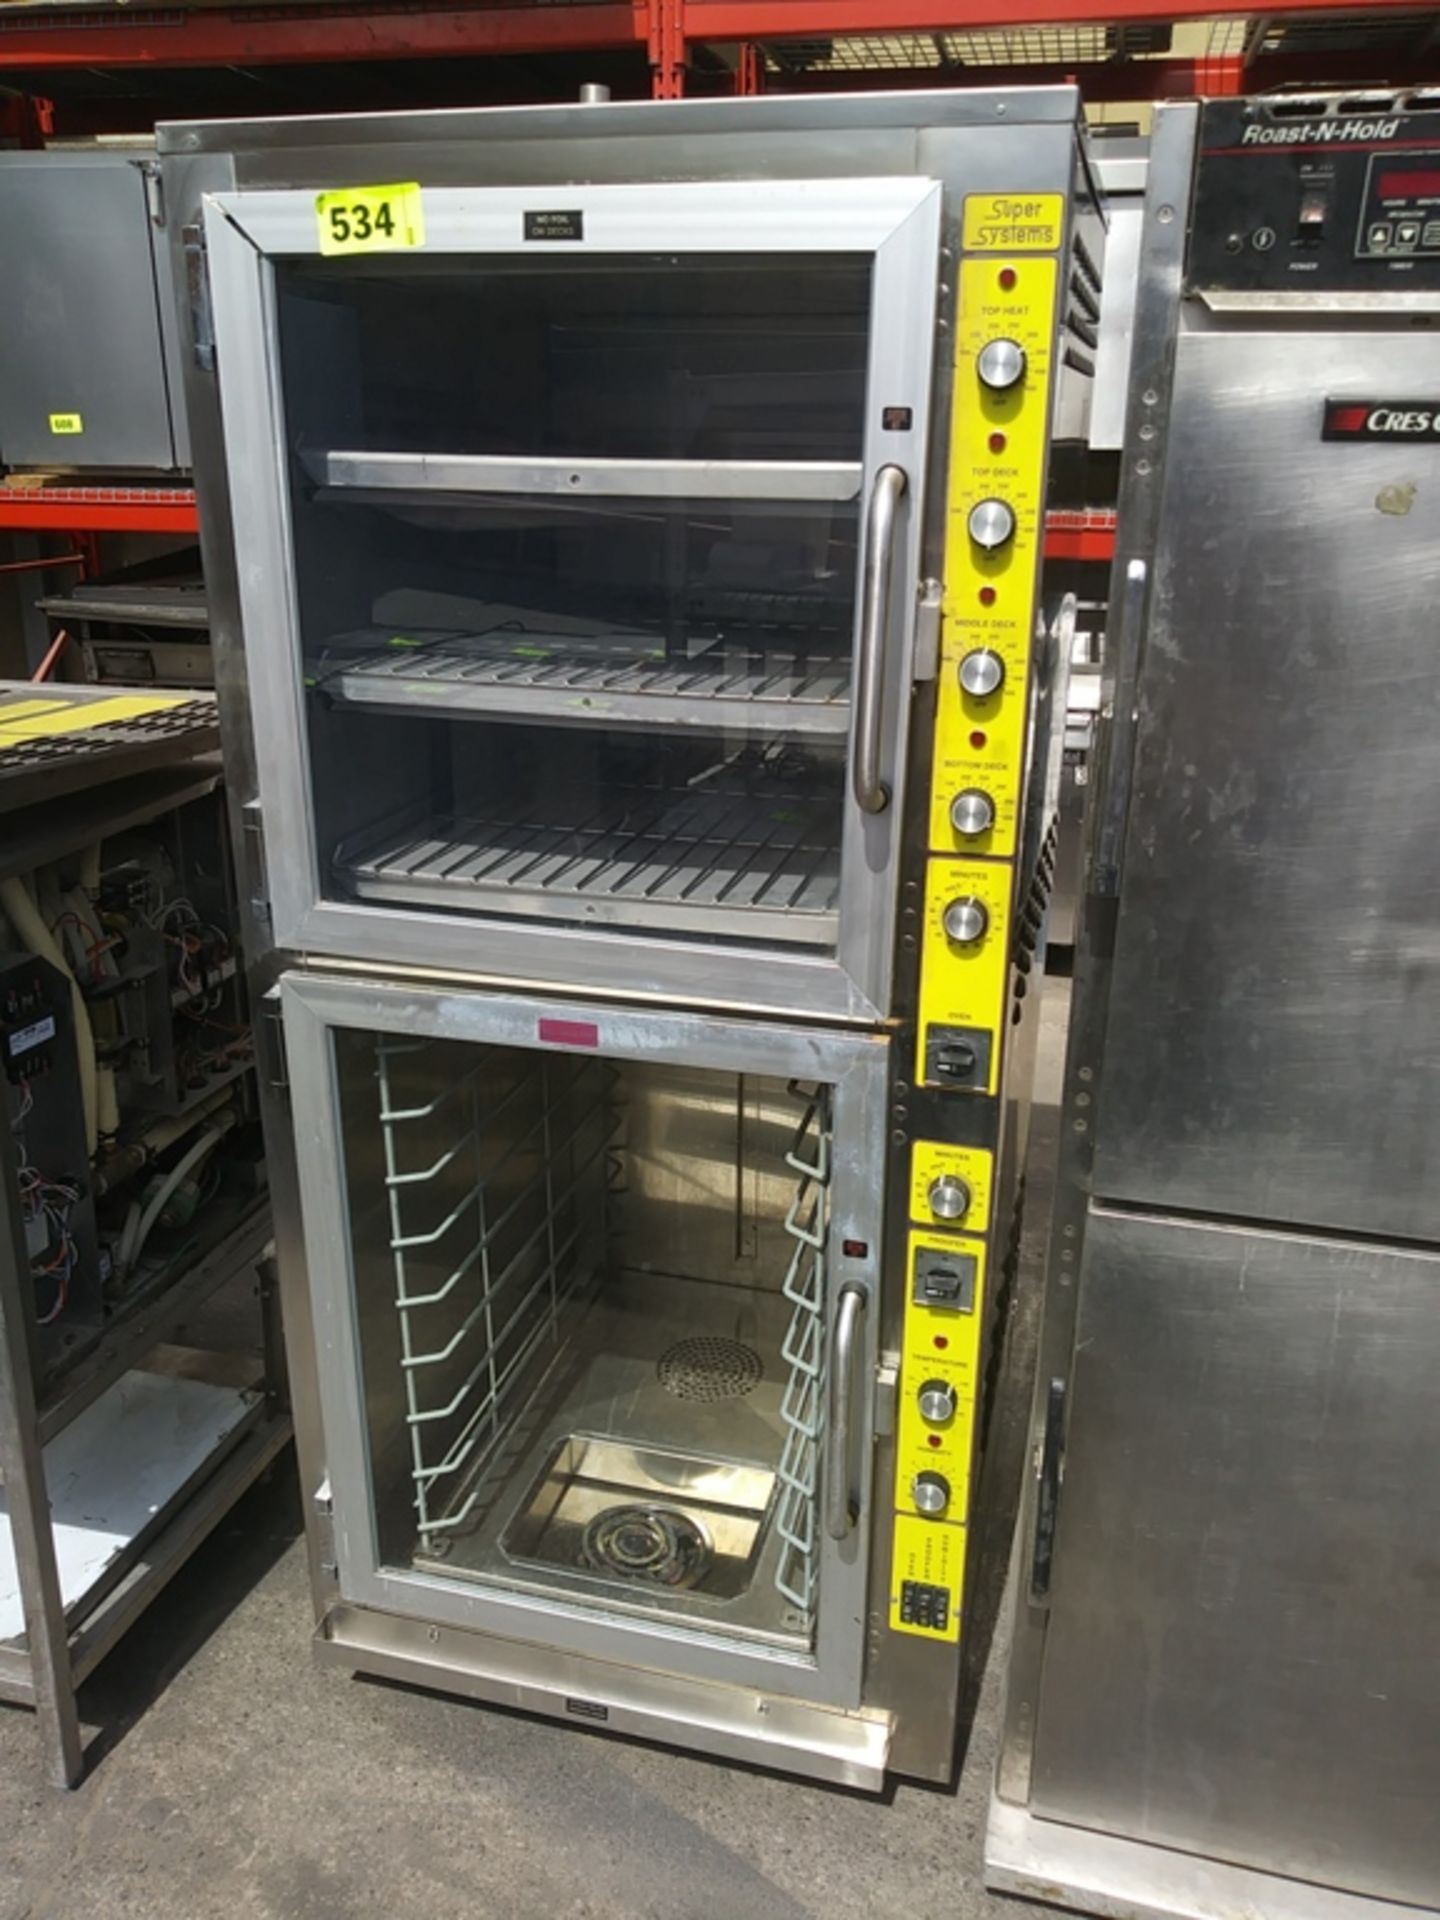 SUPERSYSTEMS 3 DECK CONVECTION OVEN (MODEL: OP-3-TS) - Image 2 of 5